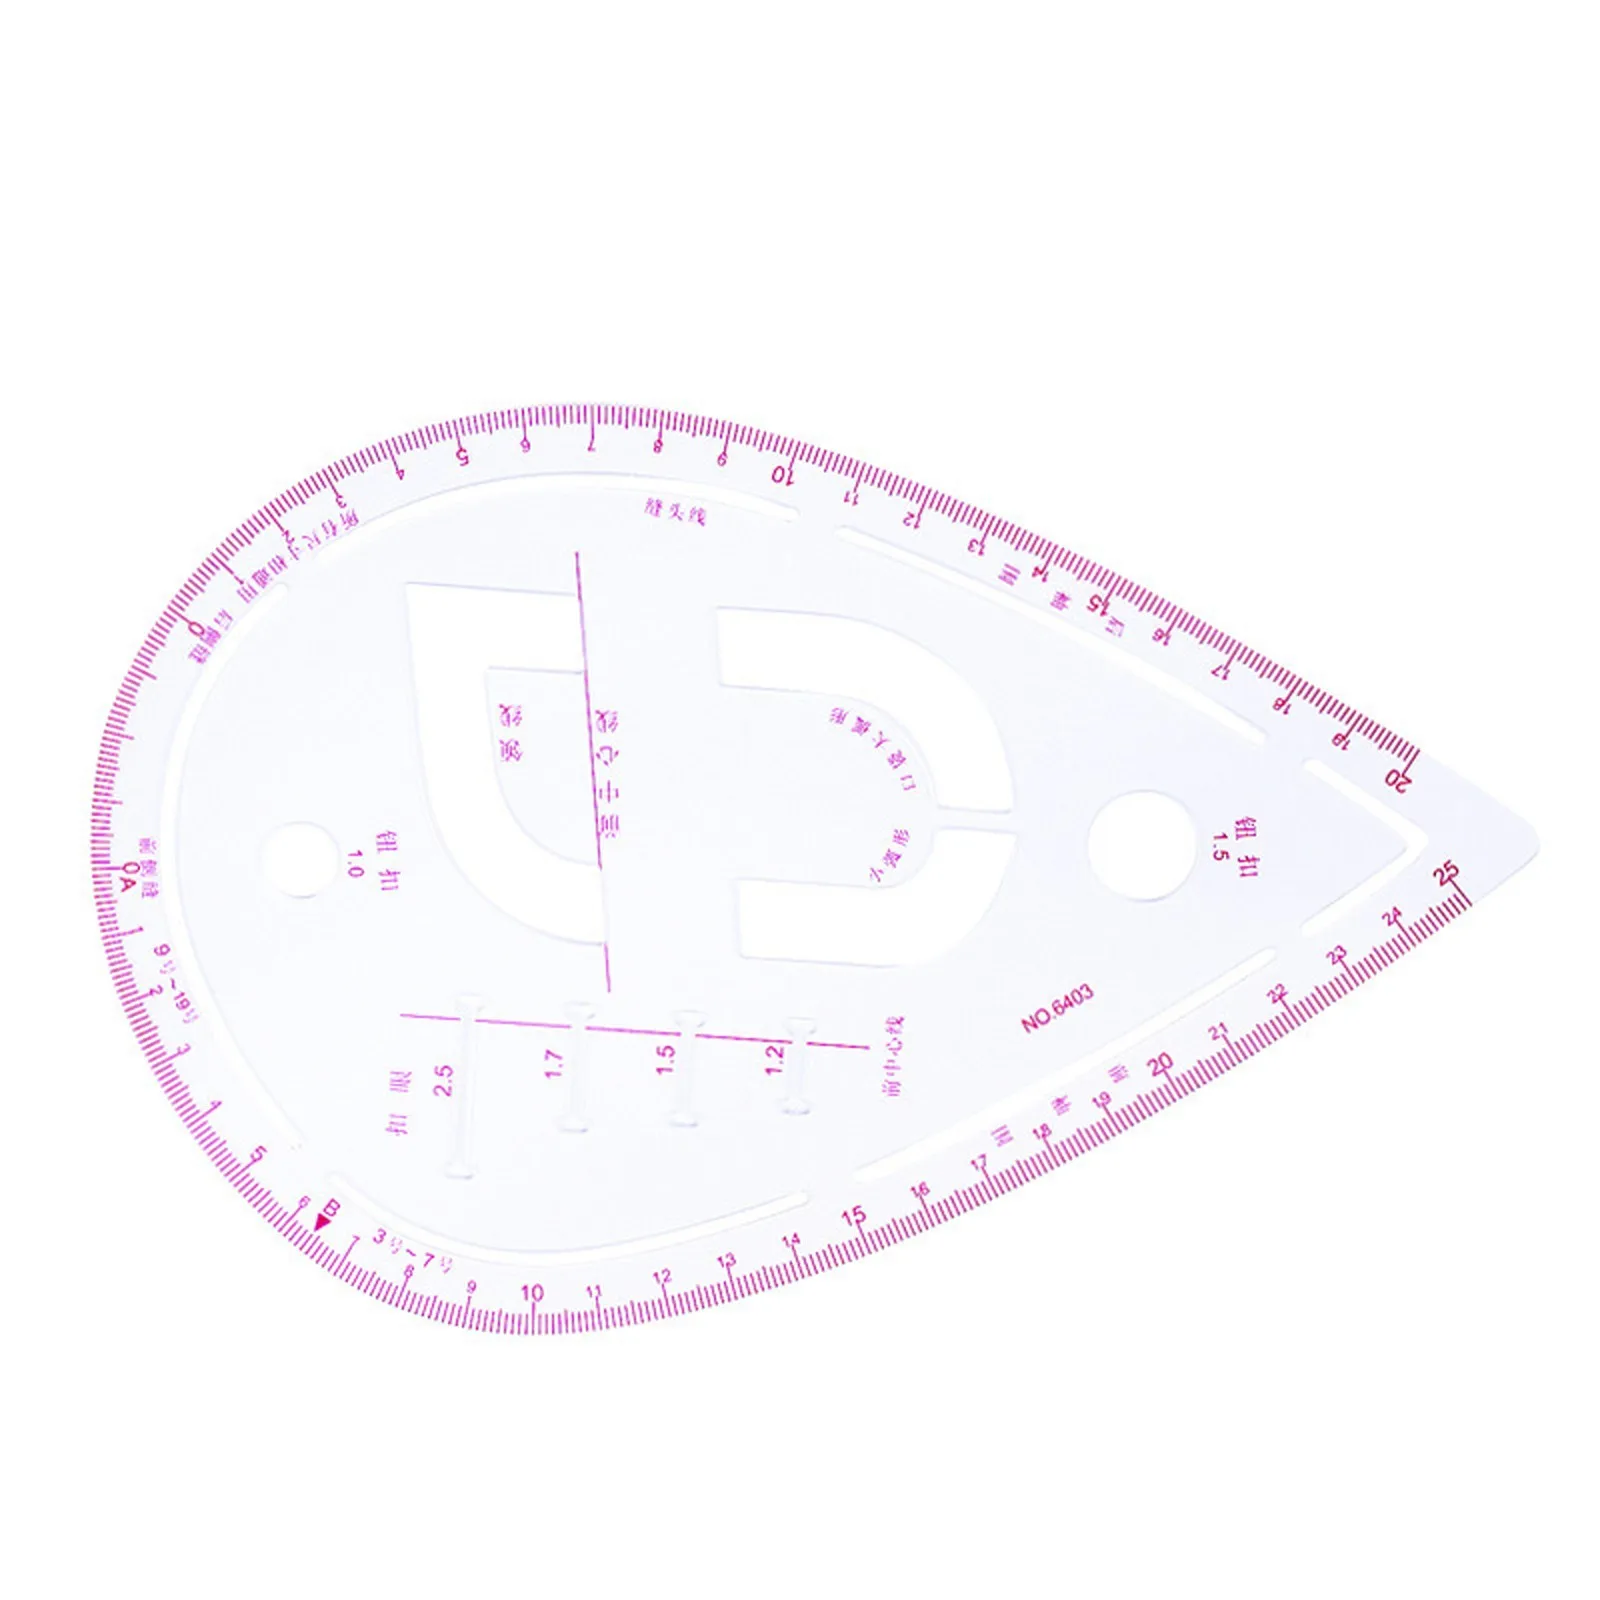 WYSE 7 Piece Set Metric Clothes Curve Sewing Ruler Drawing Stencil Making Grading Curve Rule Pattern Making Accessories Making